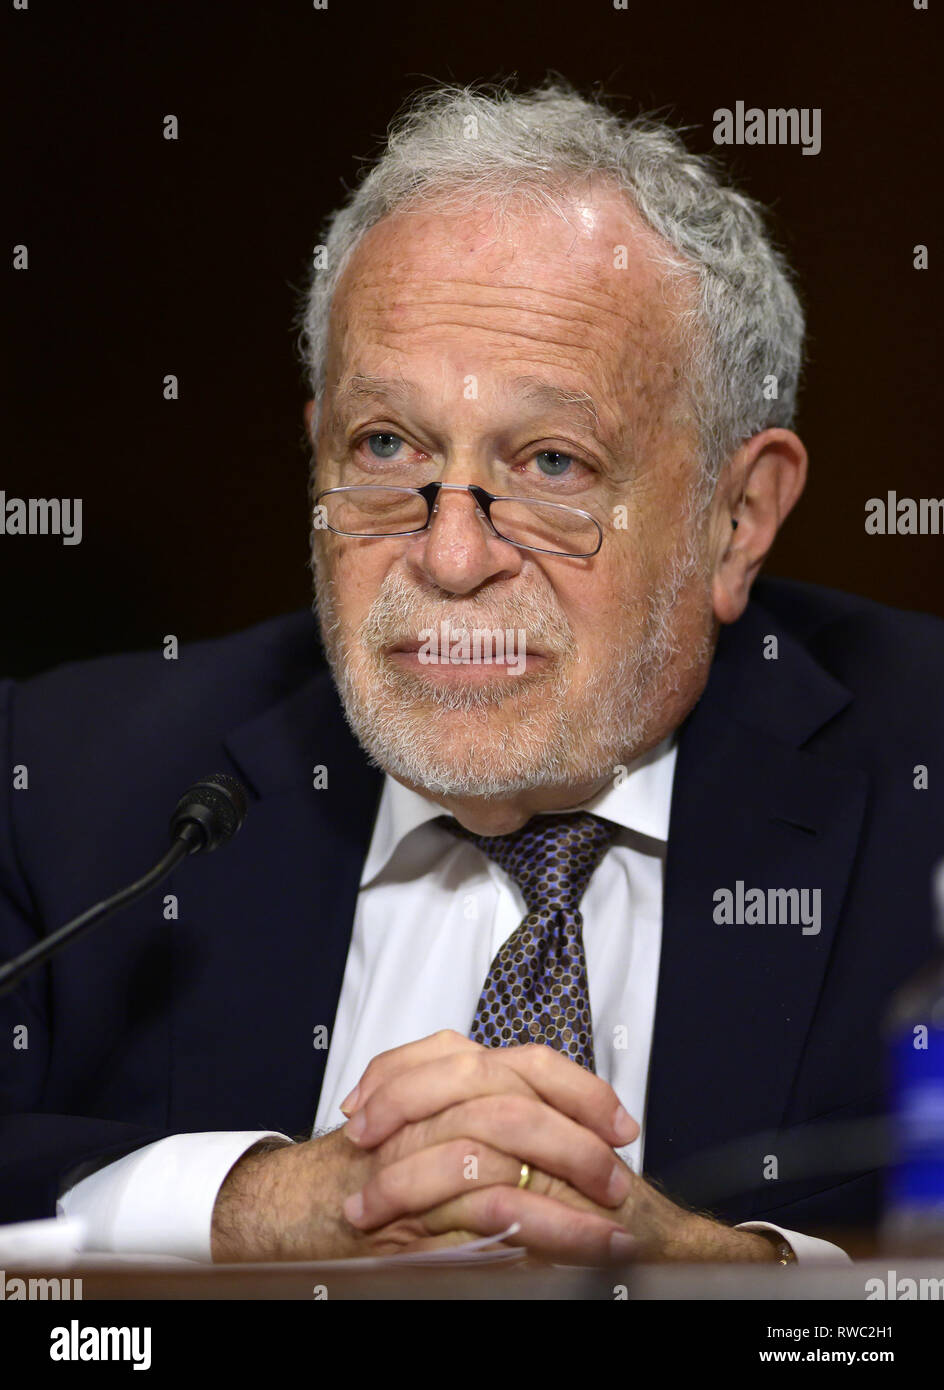 Washington, District of Columbia, USA. 5th Mar, 2019. Robert B. Reich, Chancellor's Professor of Public Policy, Goldman School of Public Policy, University of California at Berkeley, Berkeley, California testifies during the United States Senate Committee on the Judiciary Subcommittee on Antitrust, Competition Policy, and Consumer Rights hearing on ''Does America Have a Monopoly Problem?: Examining Concentration and Competition in the US Economy'' on Capitol Hill in Washington, DC on Tuesday, March 5, 2018 Credit: Ron Sachs/CNP/ZUMA Wire/Alamy Live News Stock Photo